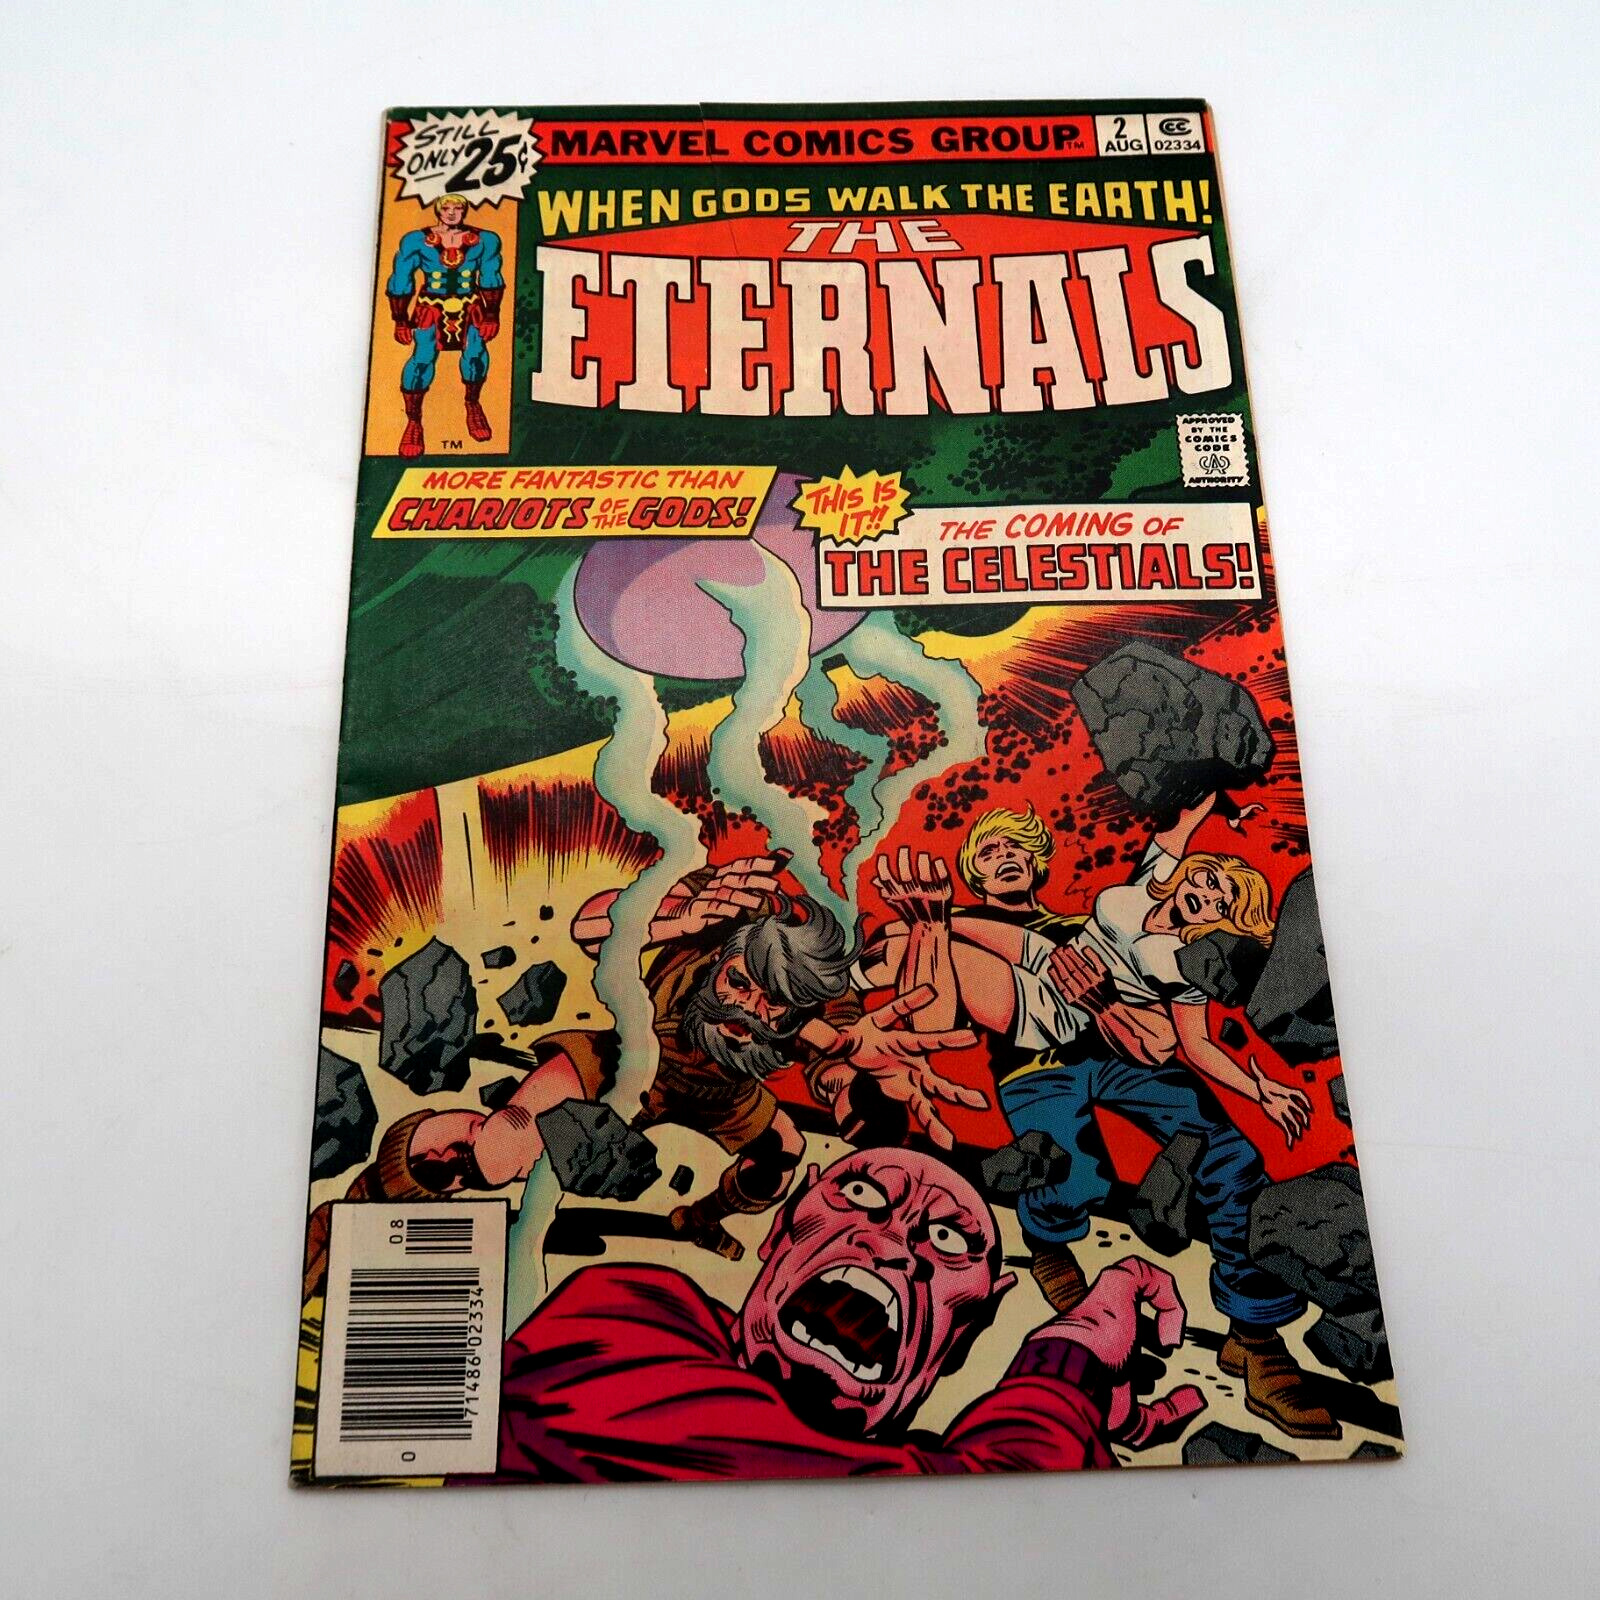 Marvel Comics The Eternals #2 - 1976 - Key Issue - First Appearances